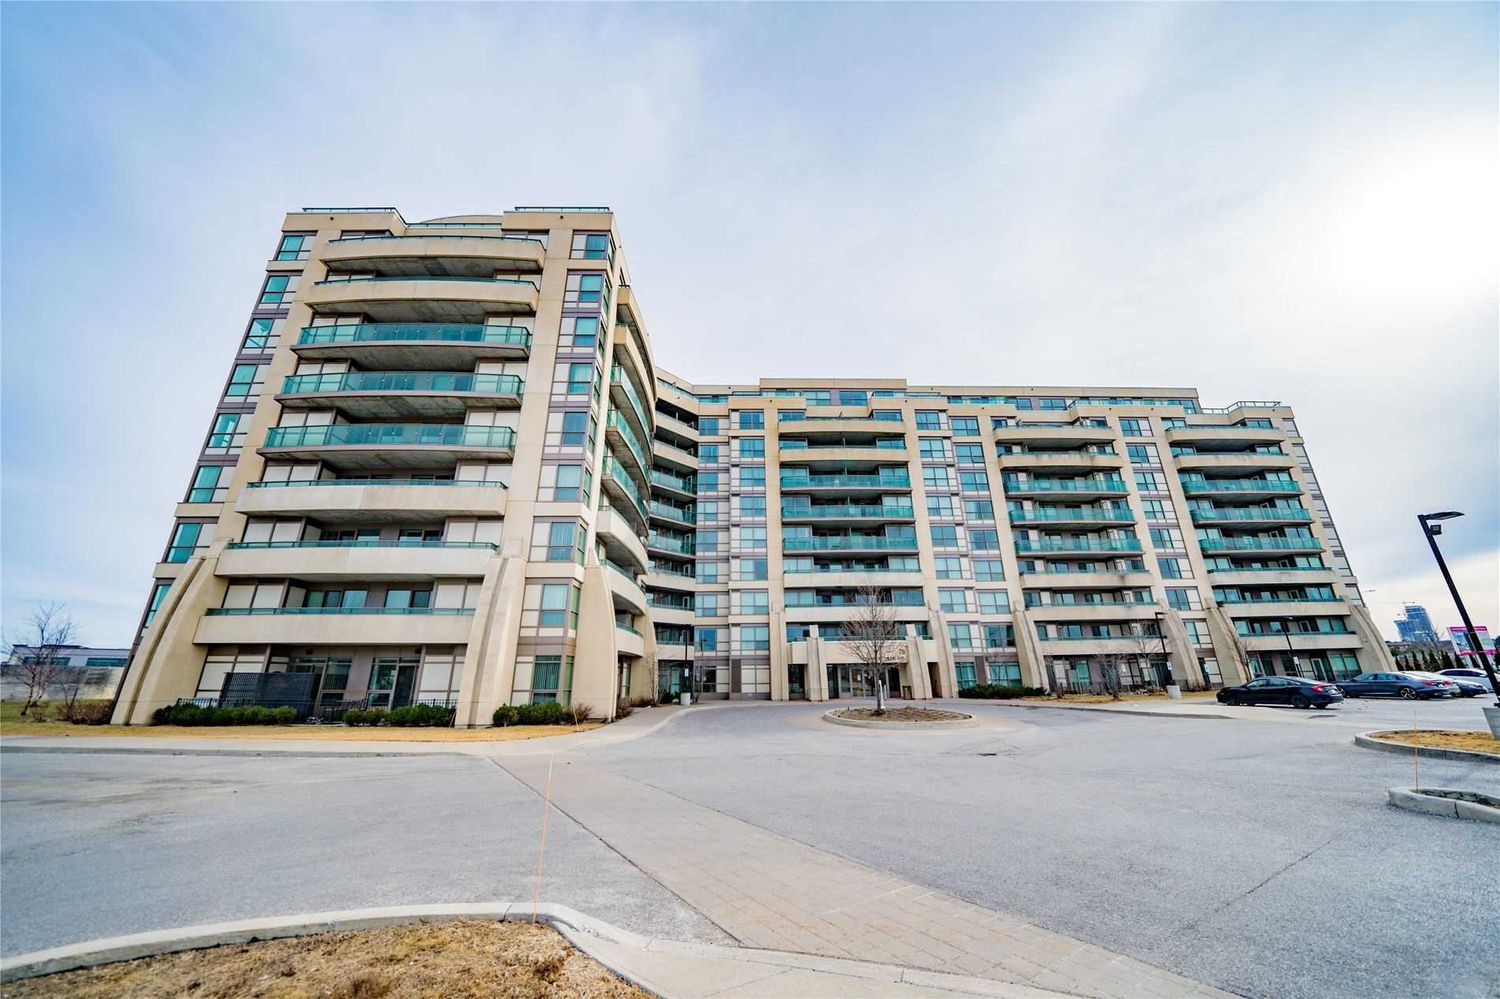 75 Norman Bethune Avenue. Four Seasons Garden Condos is located in  Richmond Hill, Toronto - image #1 of 3